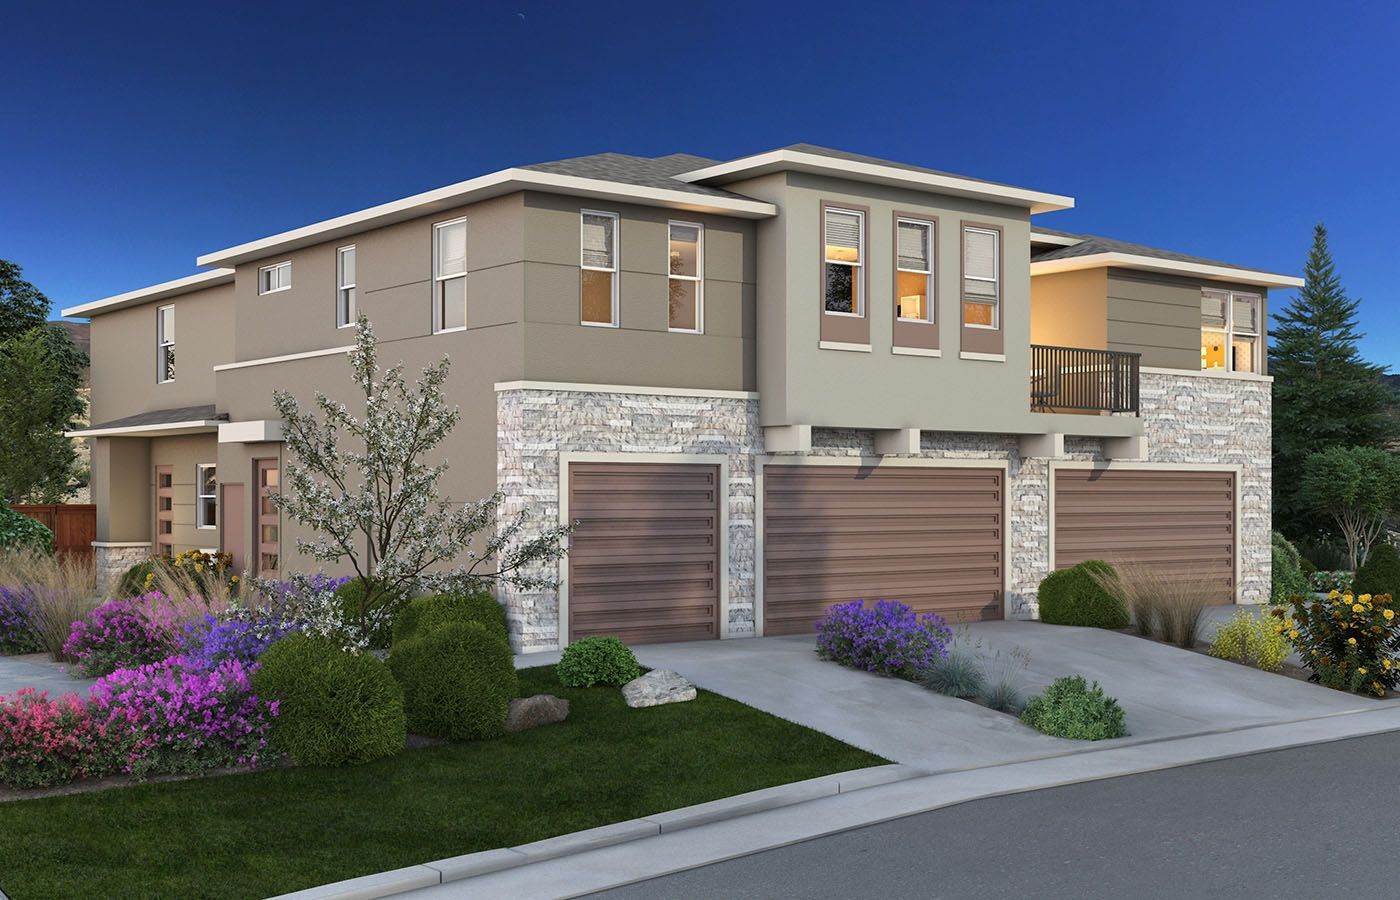 3. Village South at Valley Knolls building at 299 Radiant Drive, Carson City, NV 89705